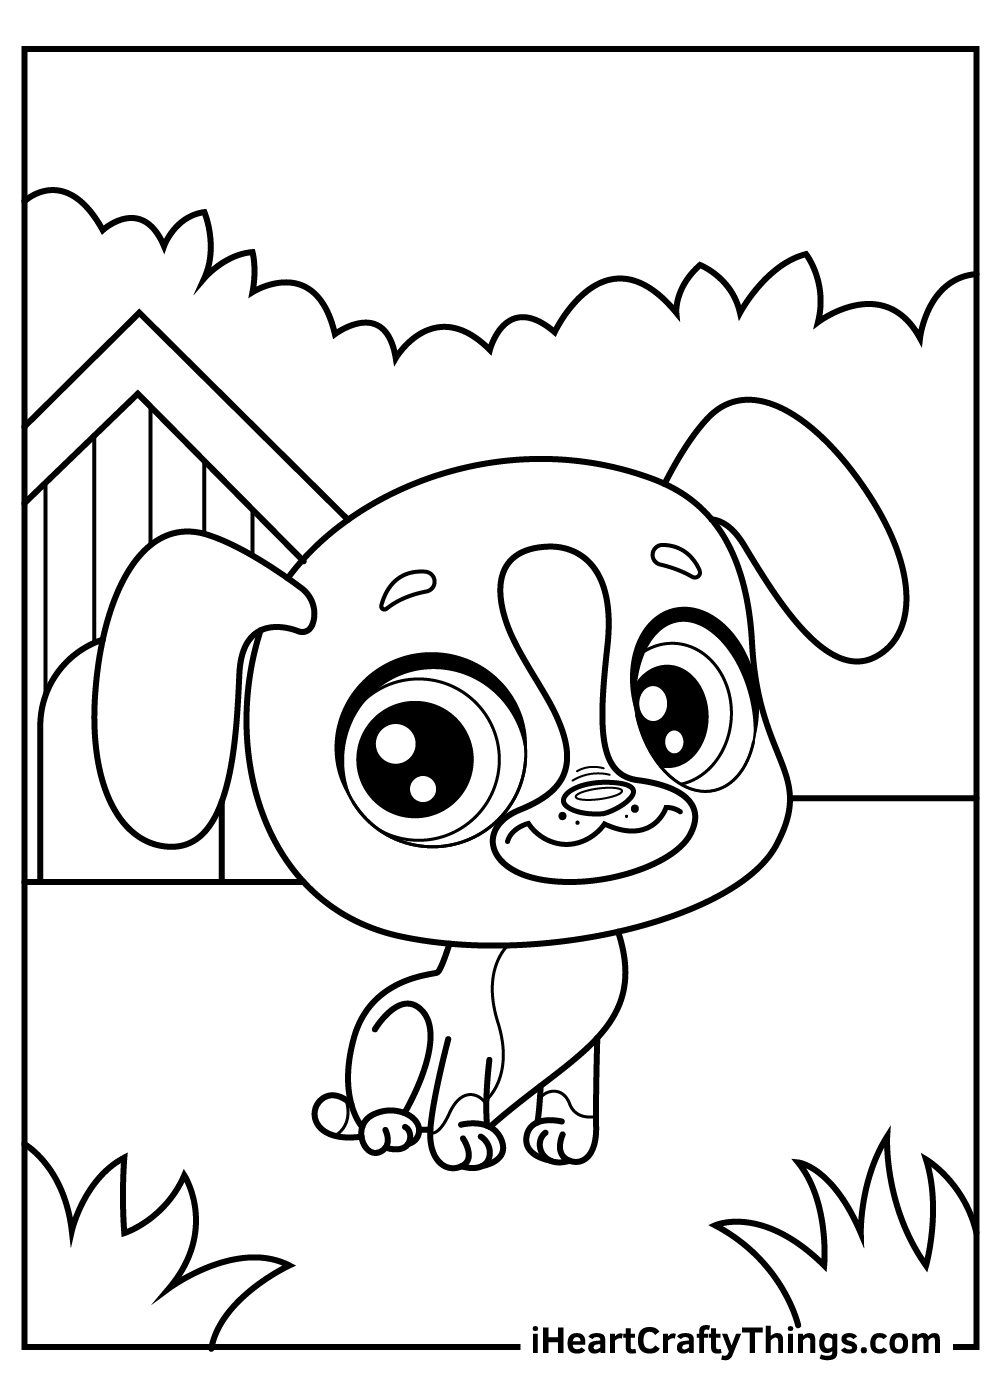 Dog And Cat Coloring Pages Updated 20